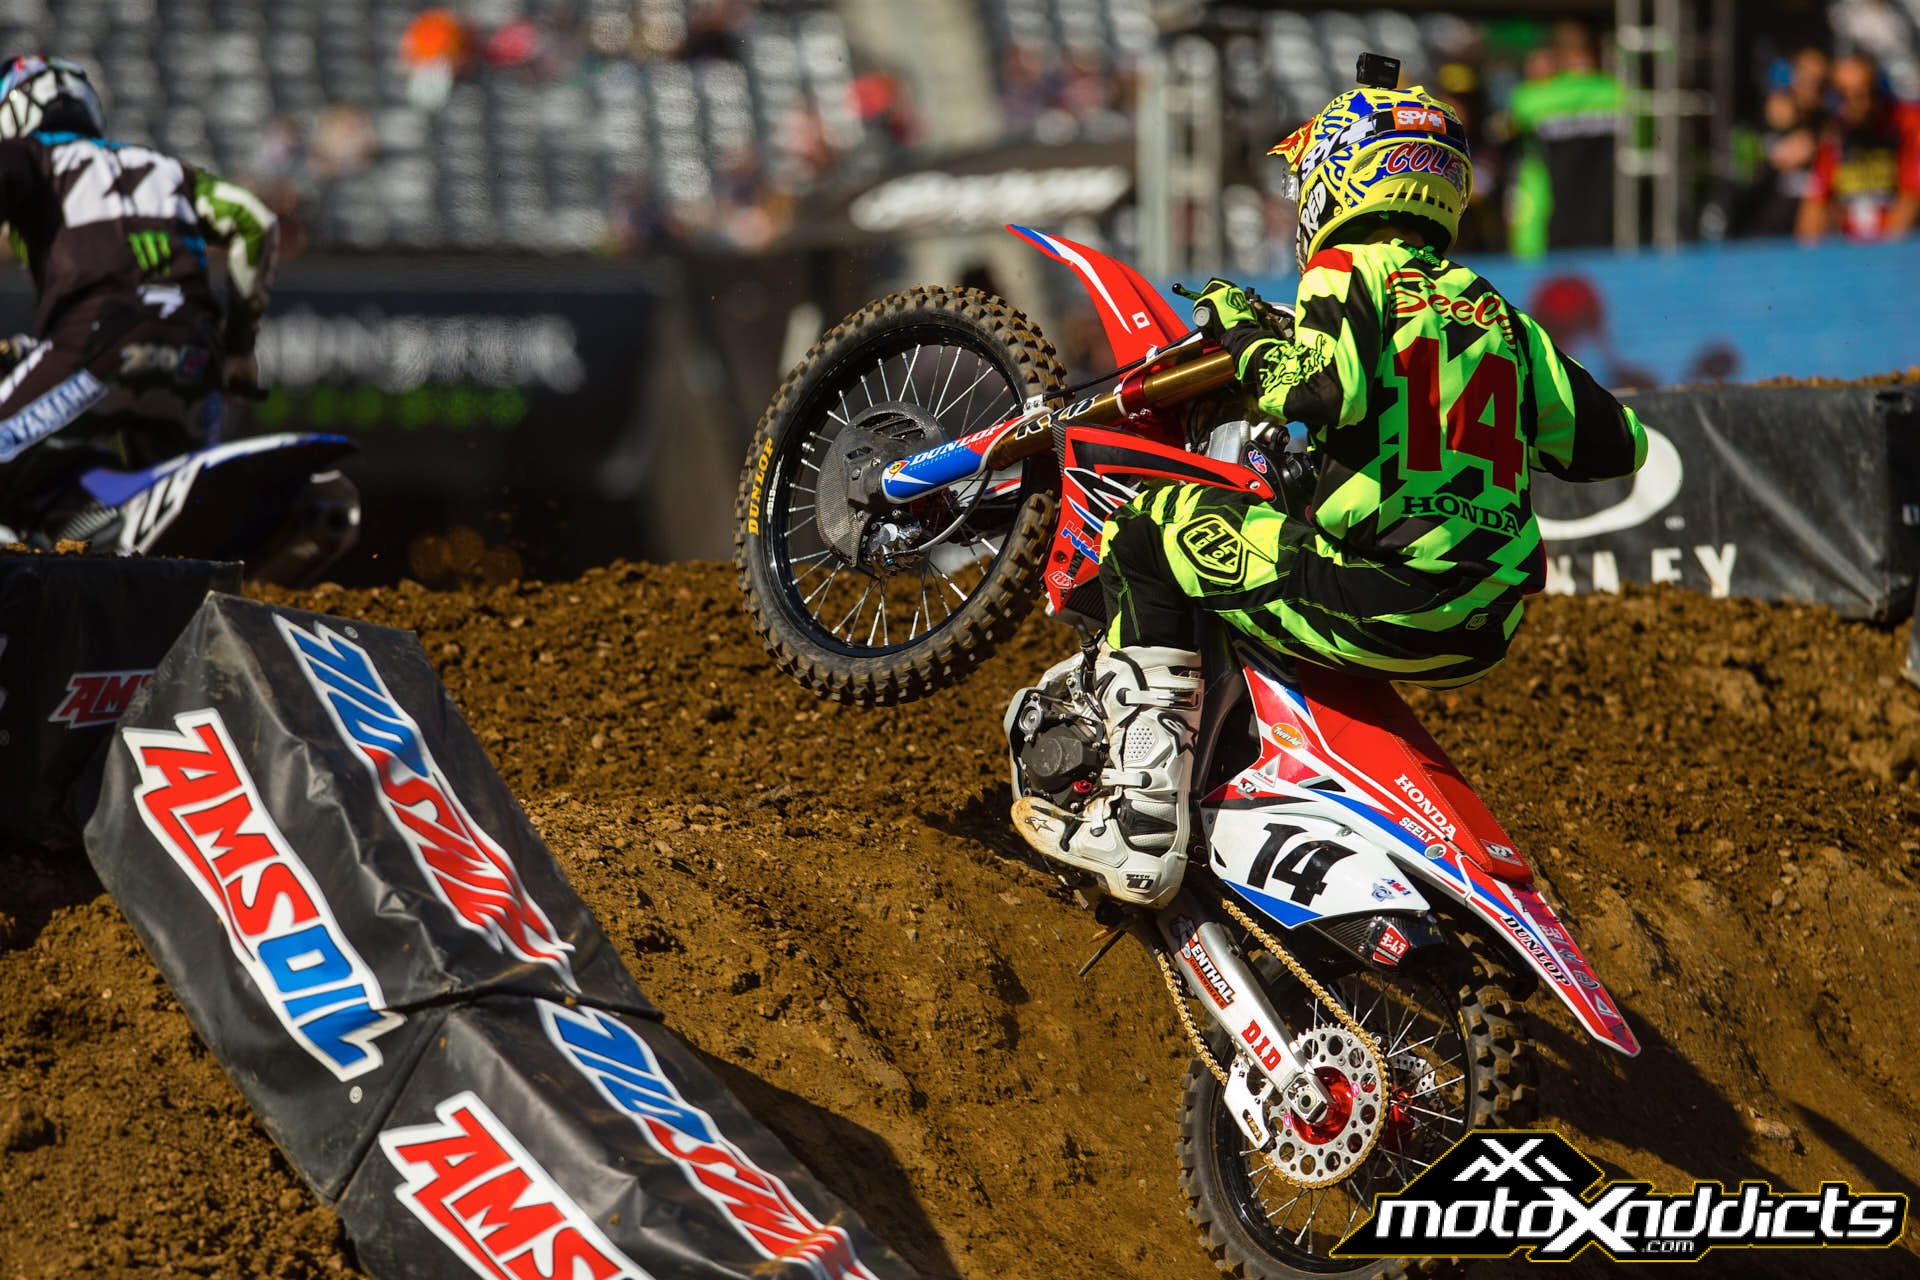 Still suffering with some gnarly neck pains, Cole Seely soldiered to a podium finish in New Jersey. 